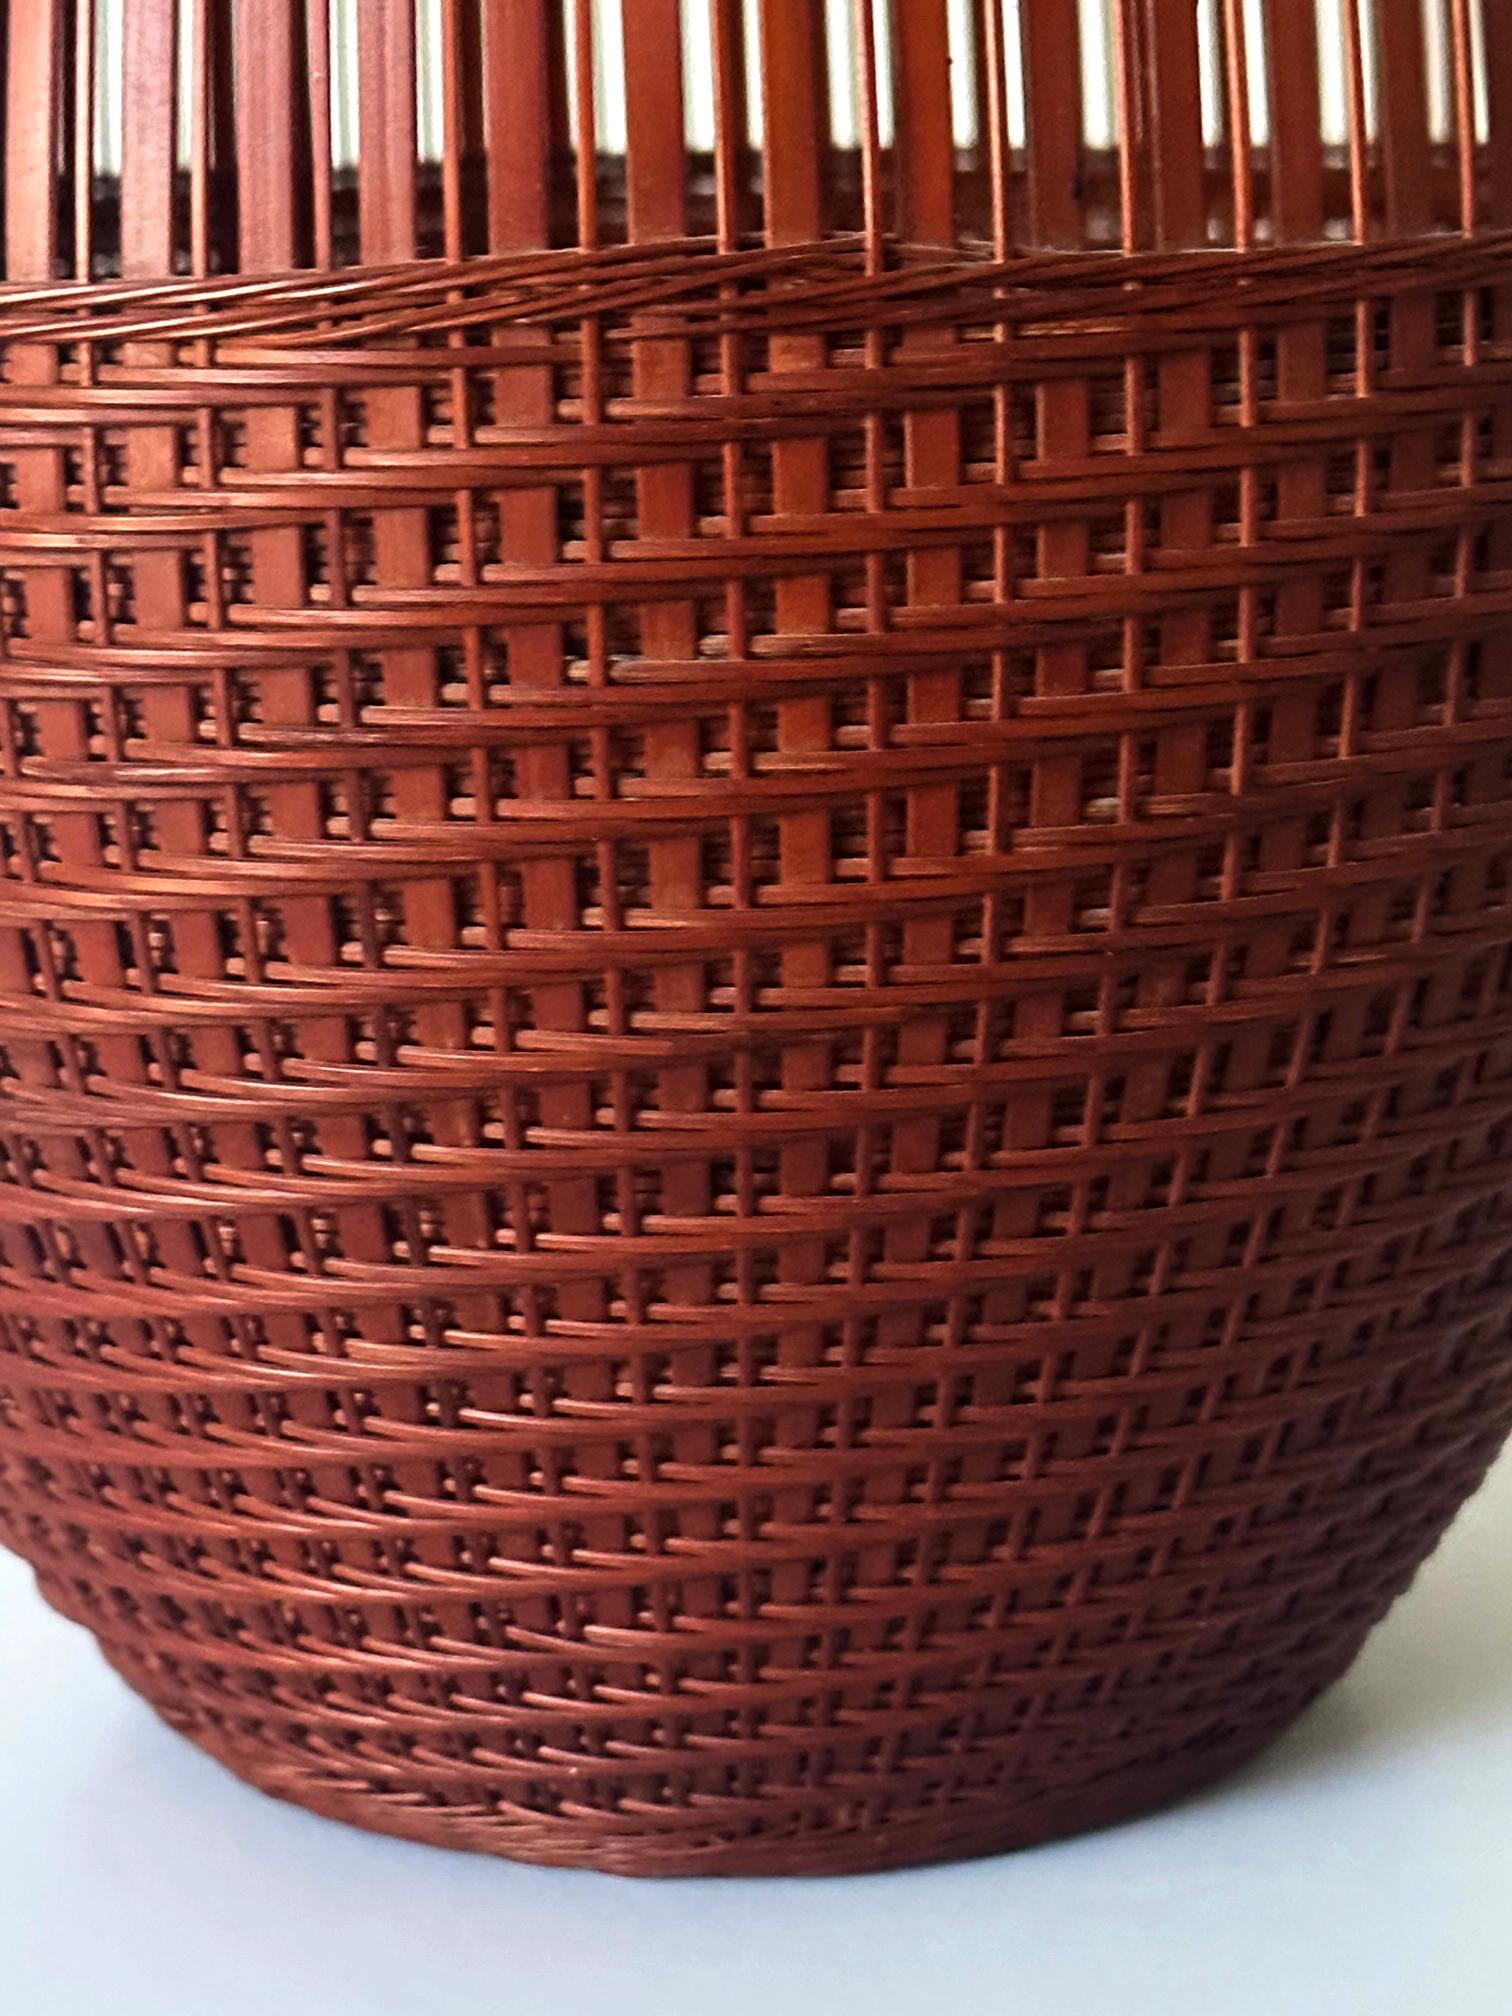 Japanese Contemporary Bamboo Basket by Abe Motoshi For Sale 3